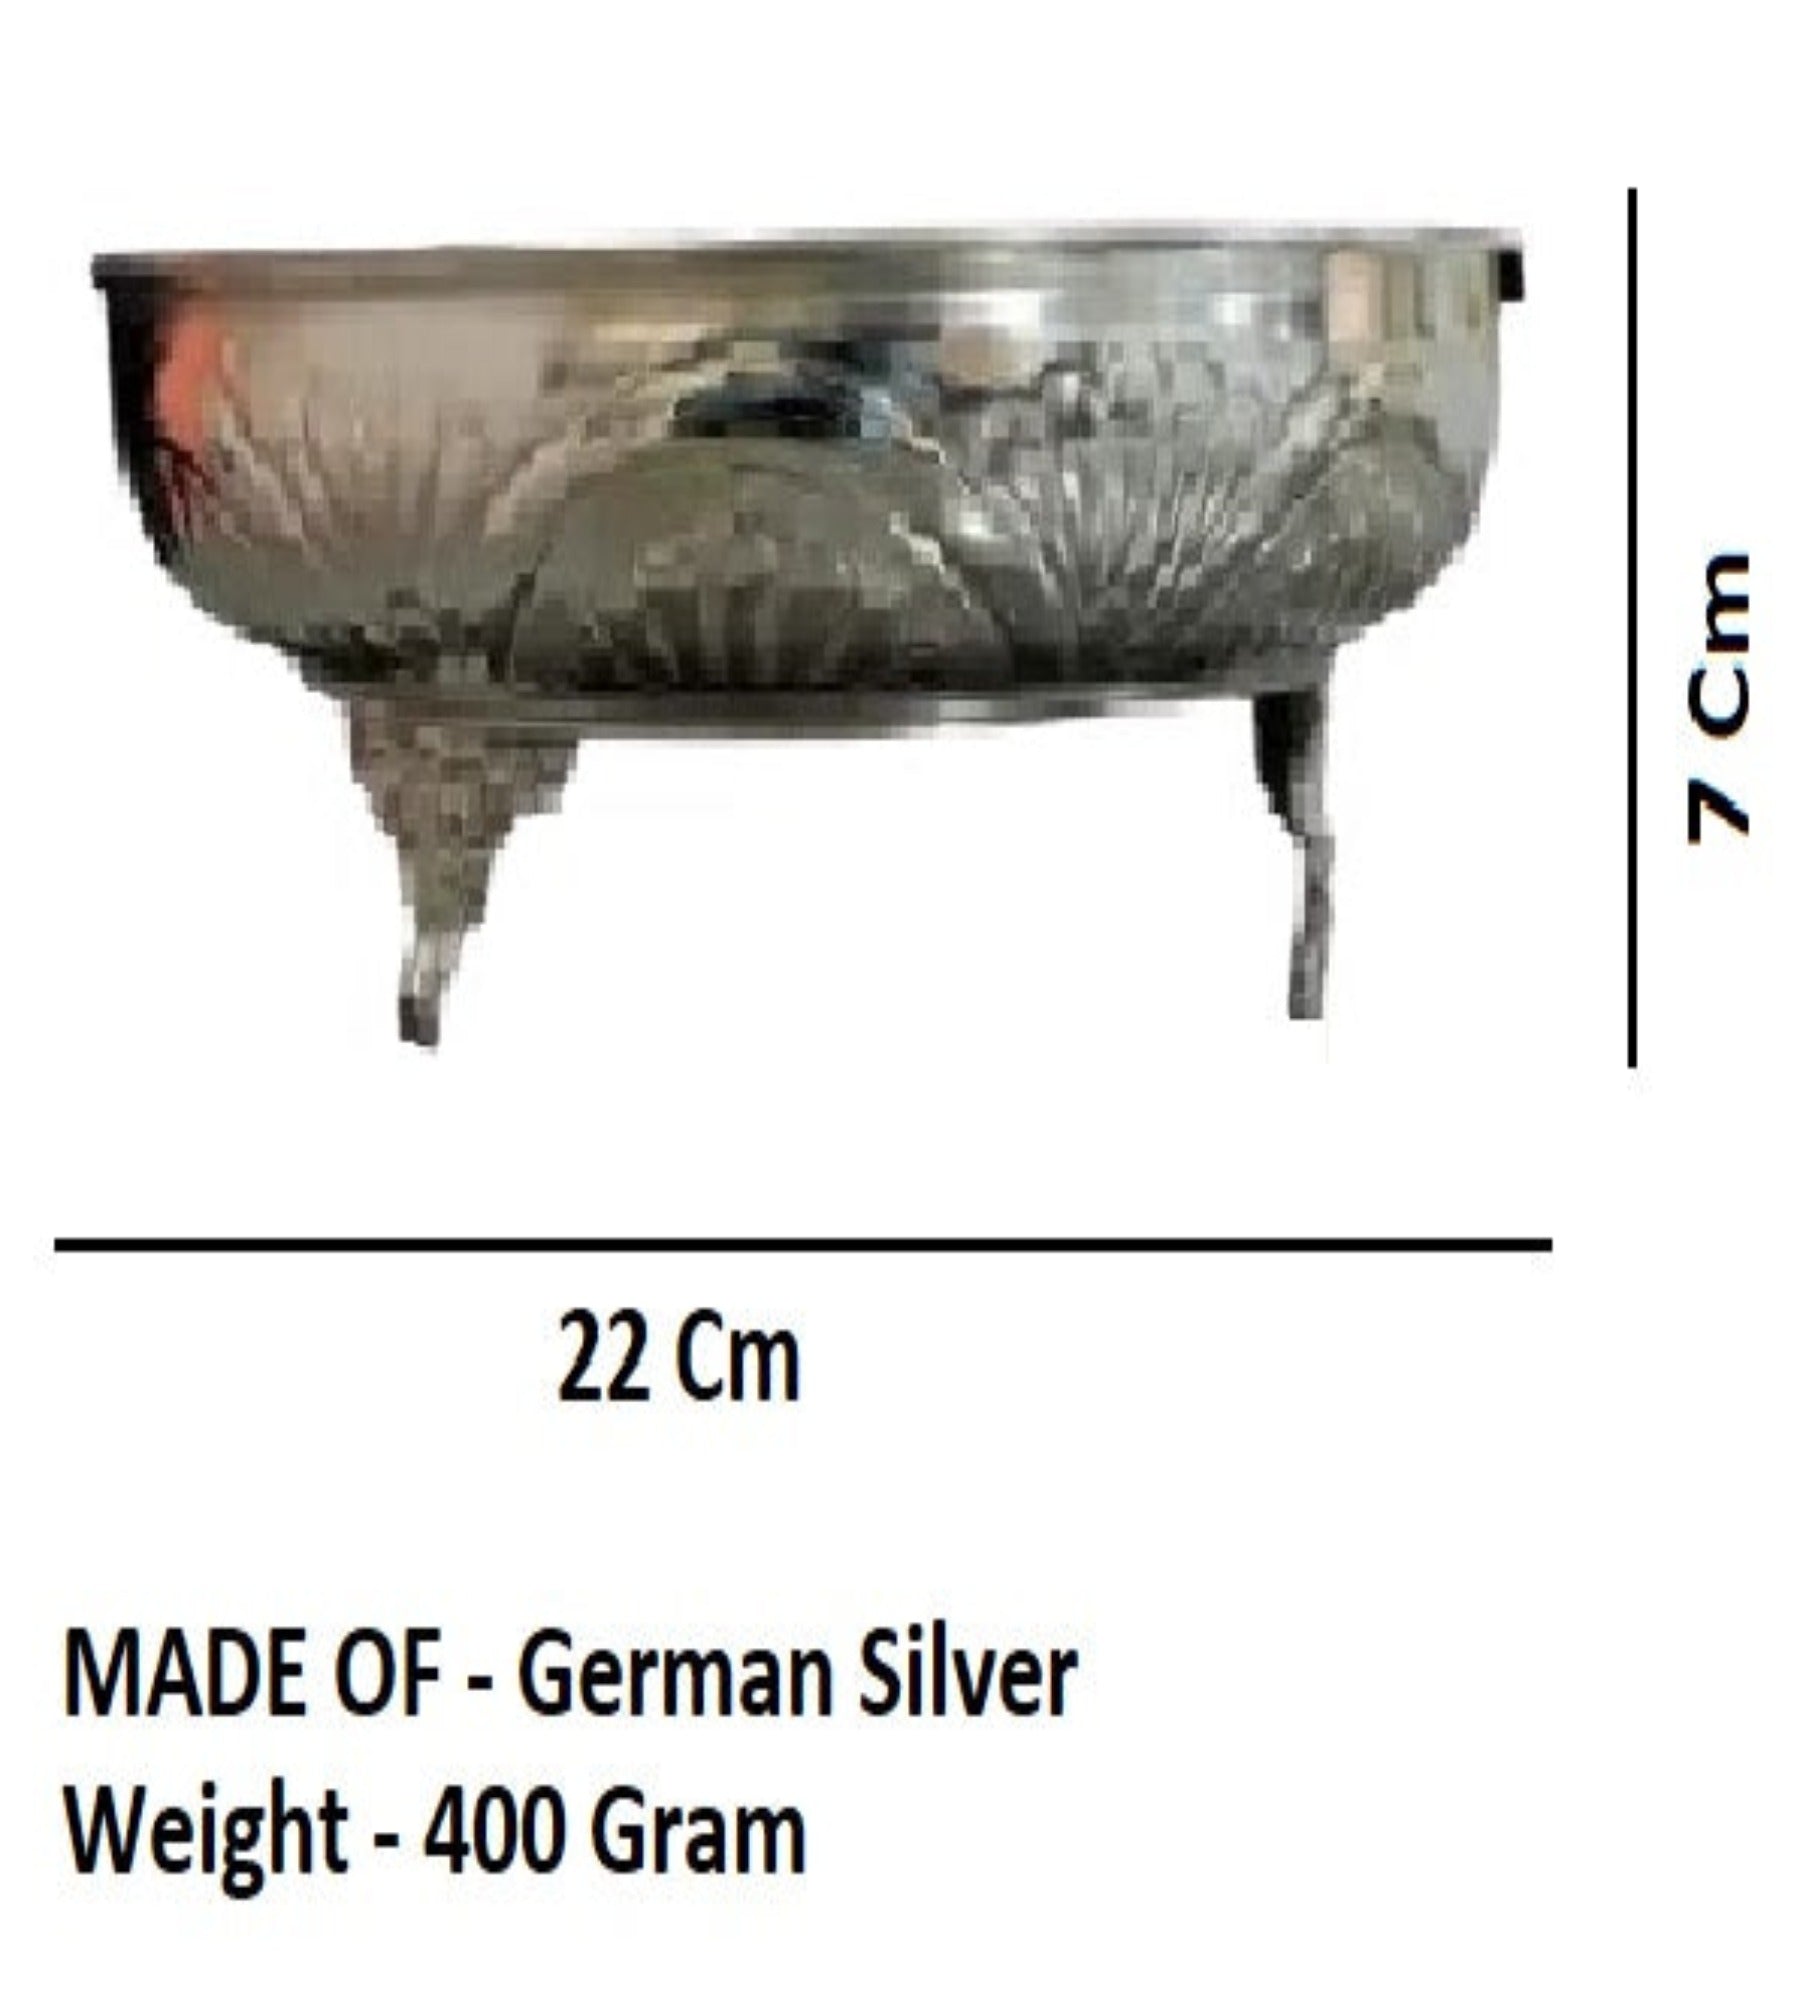 German Silver 9 Inch Floral Designed Plate With Stand for Home Pooja Decor K3808